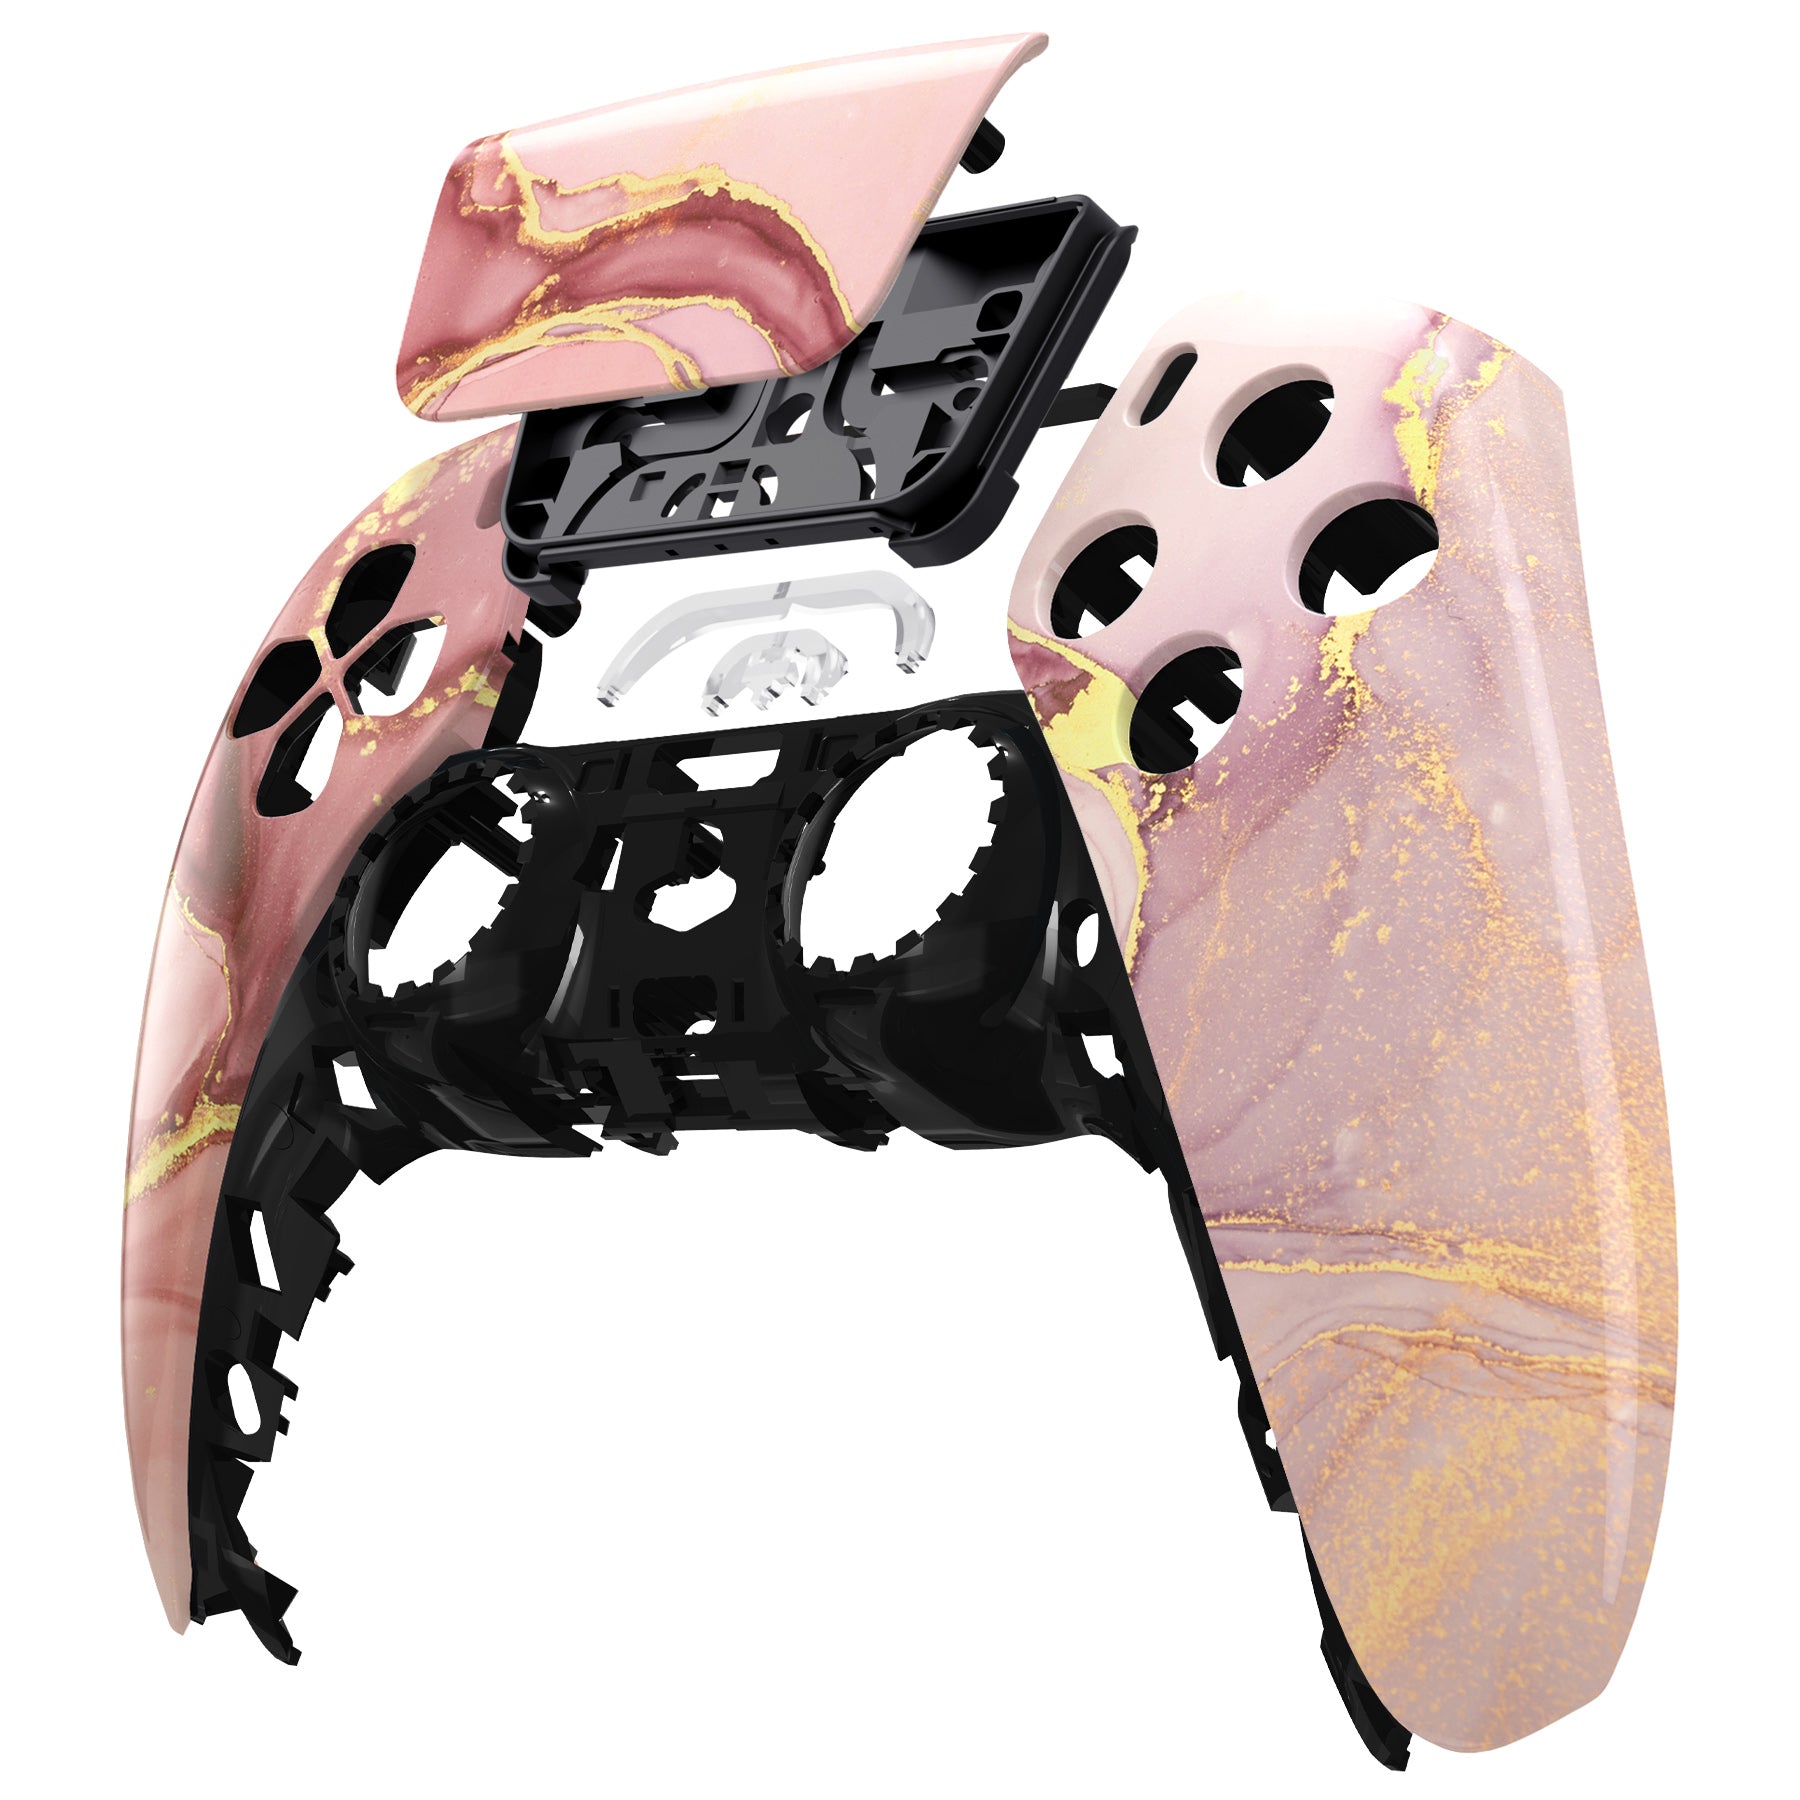 PS5 Console Skin Gold Marble